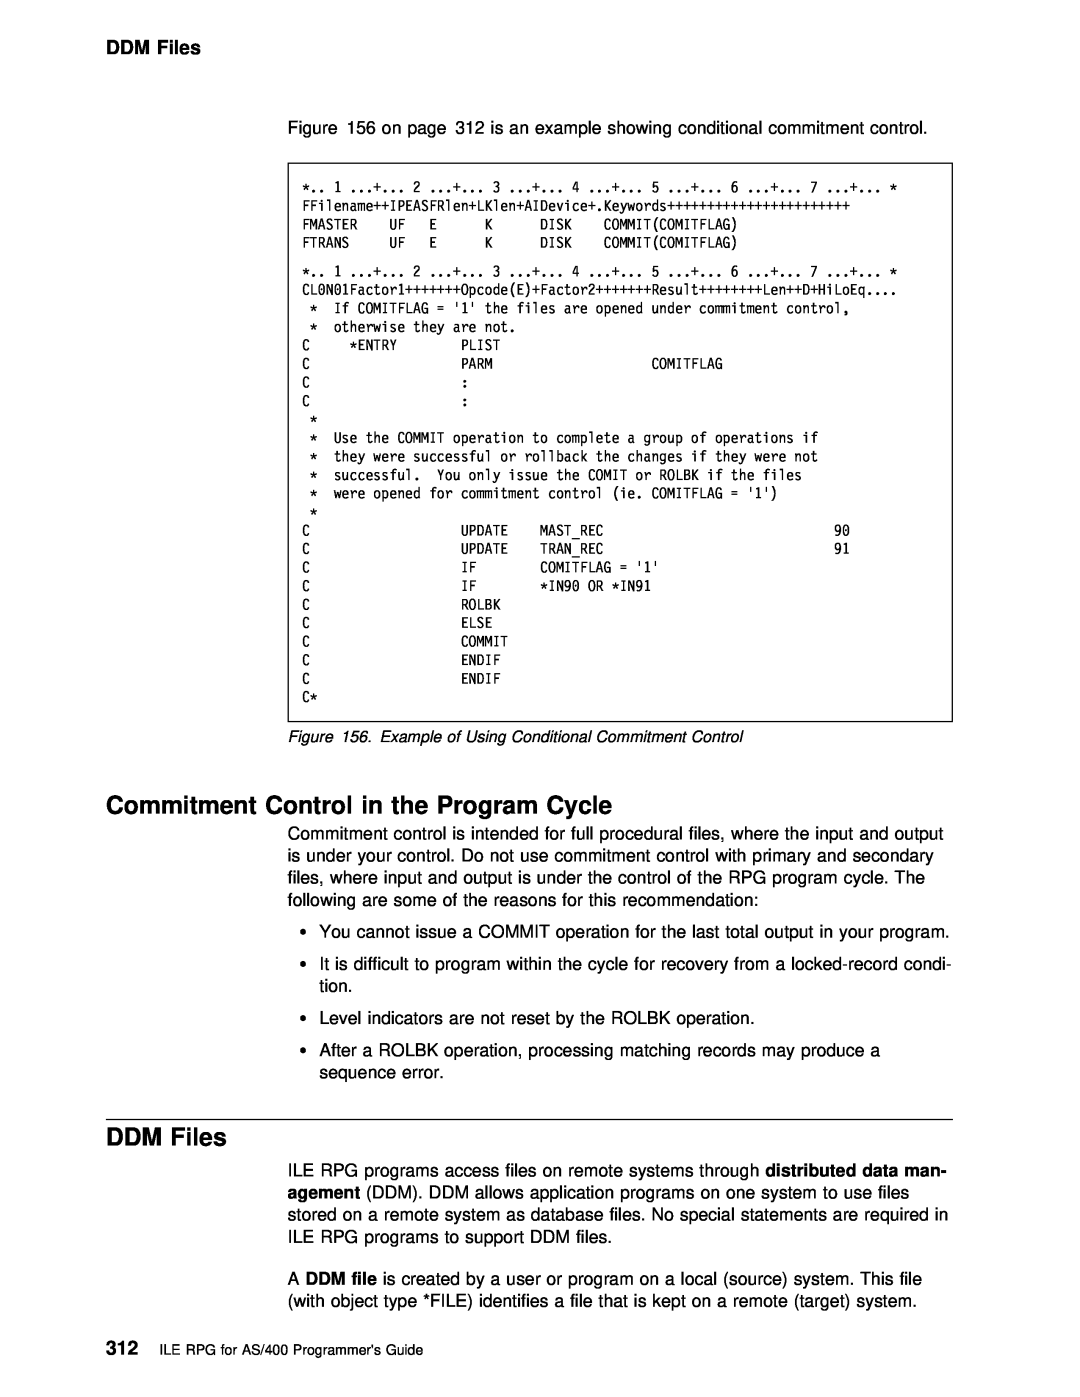 IBM AS/400 manual Cycle, DDM Files, Commitment Control in 